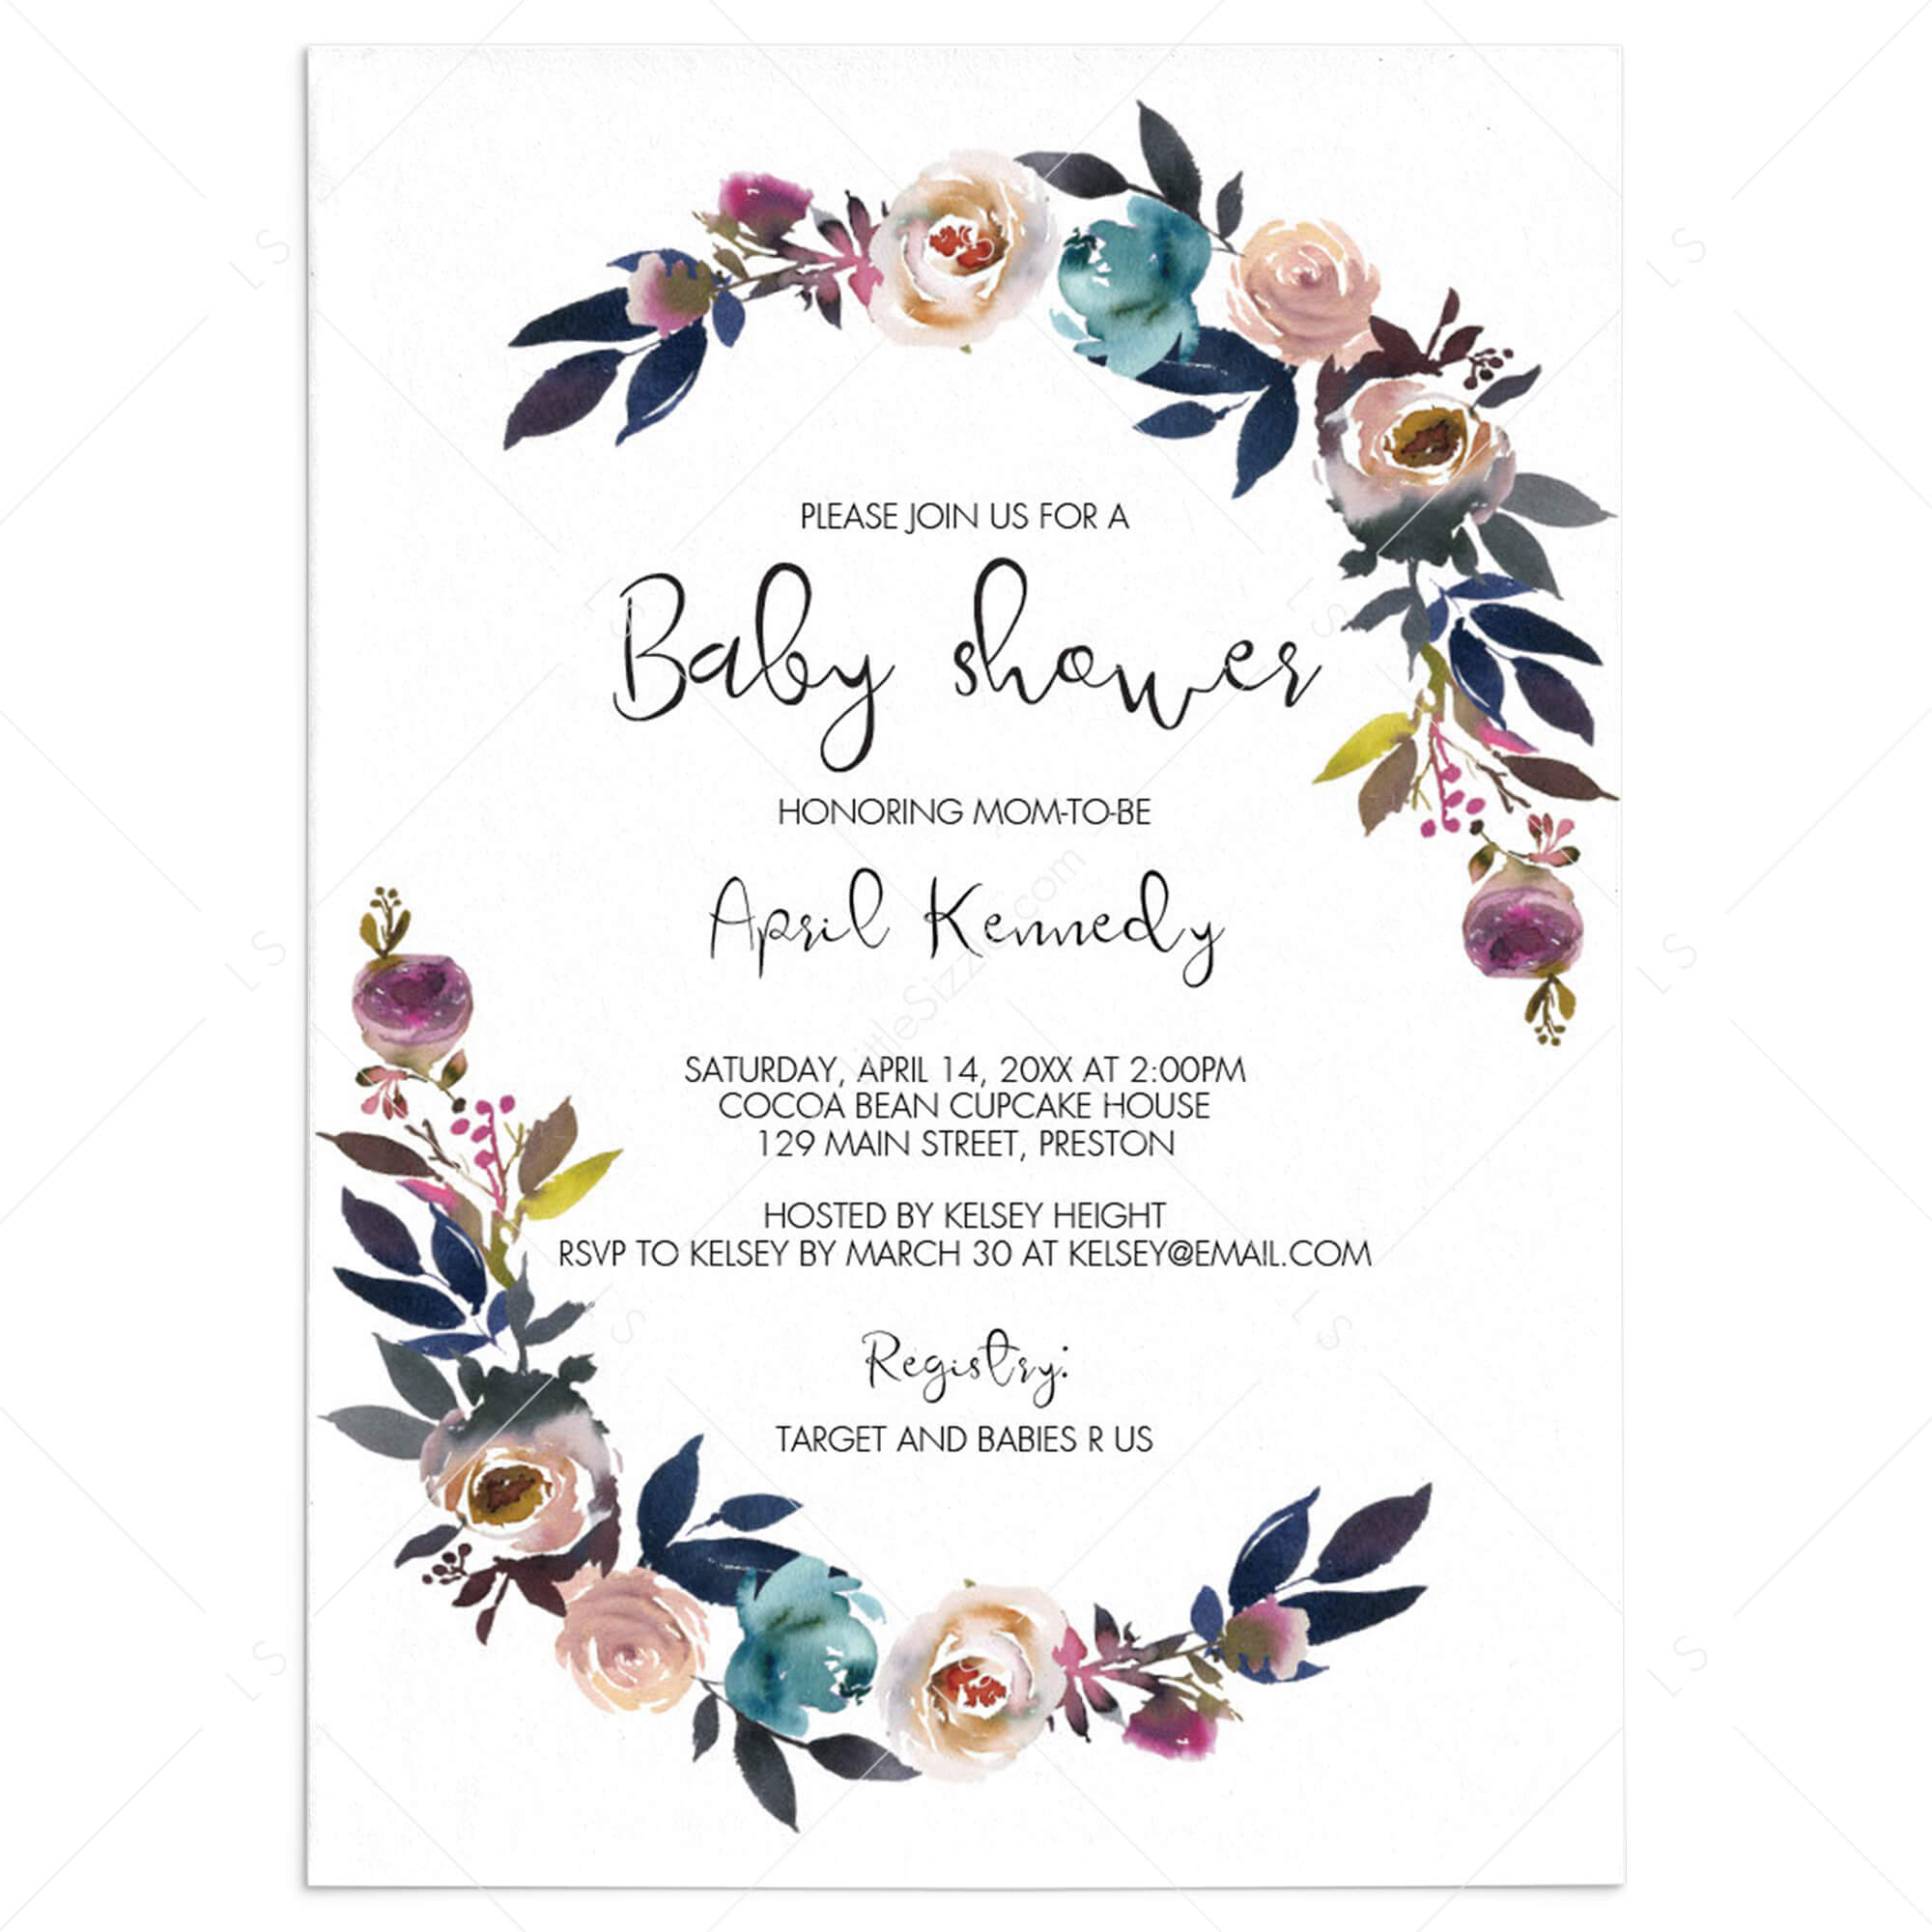 surprise baby shower invitations templates